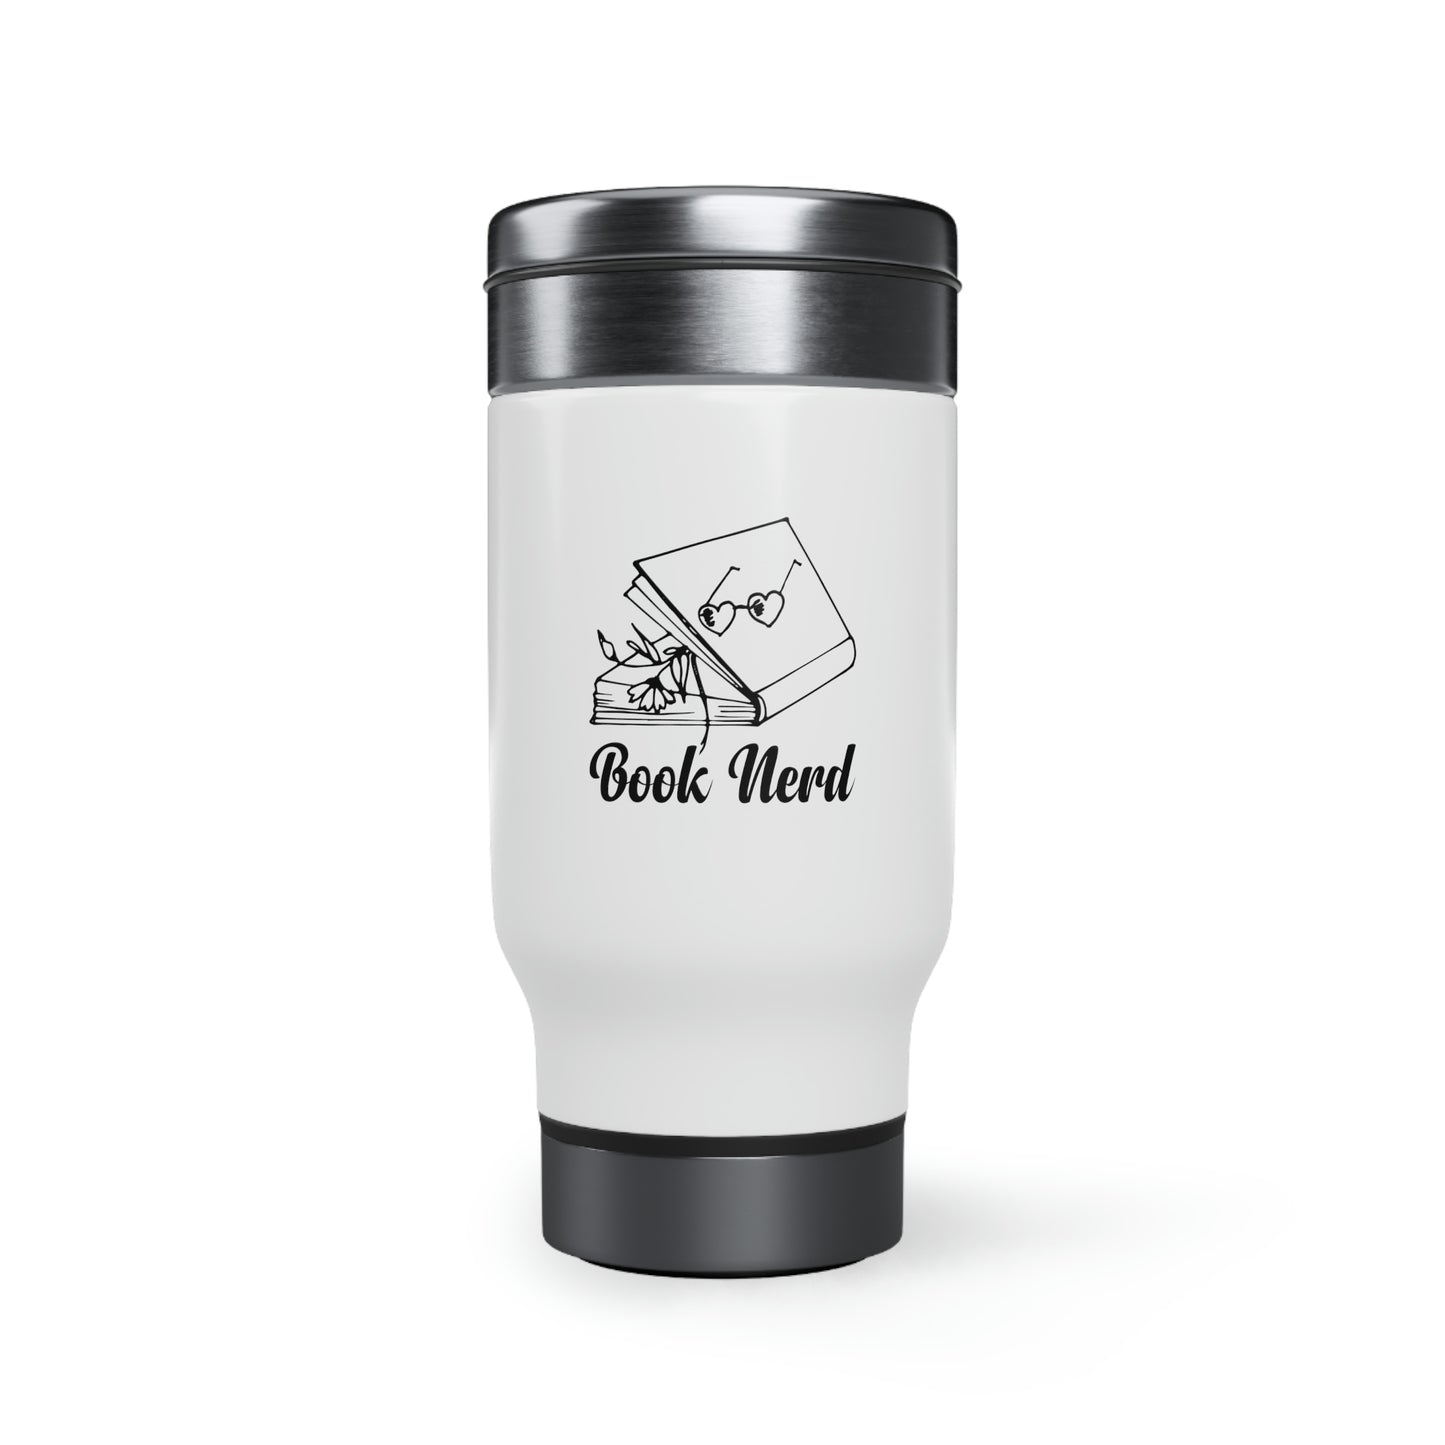 "Book Nerd" Stainless Steel Travel Mug with Handle, 14oz